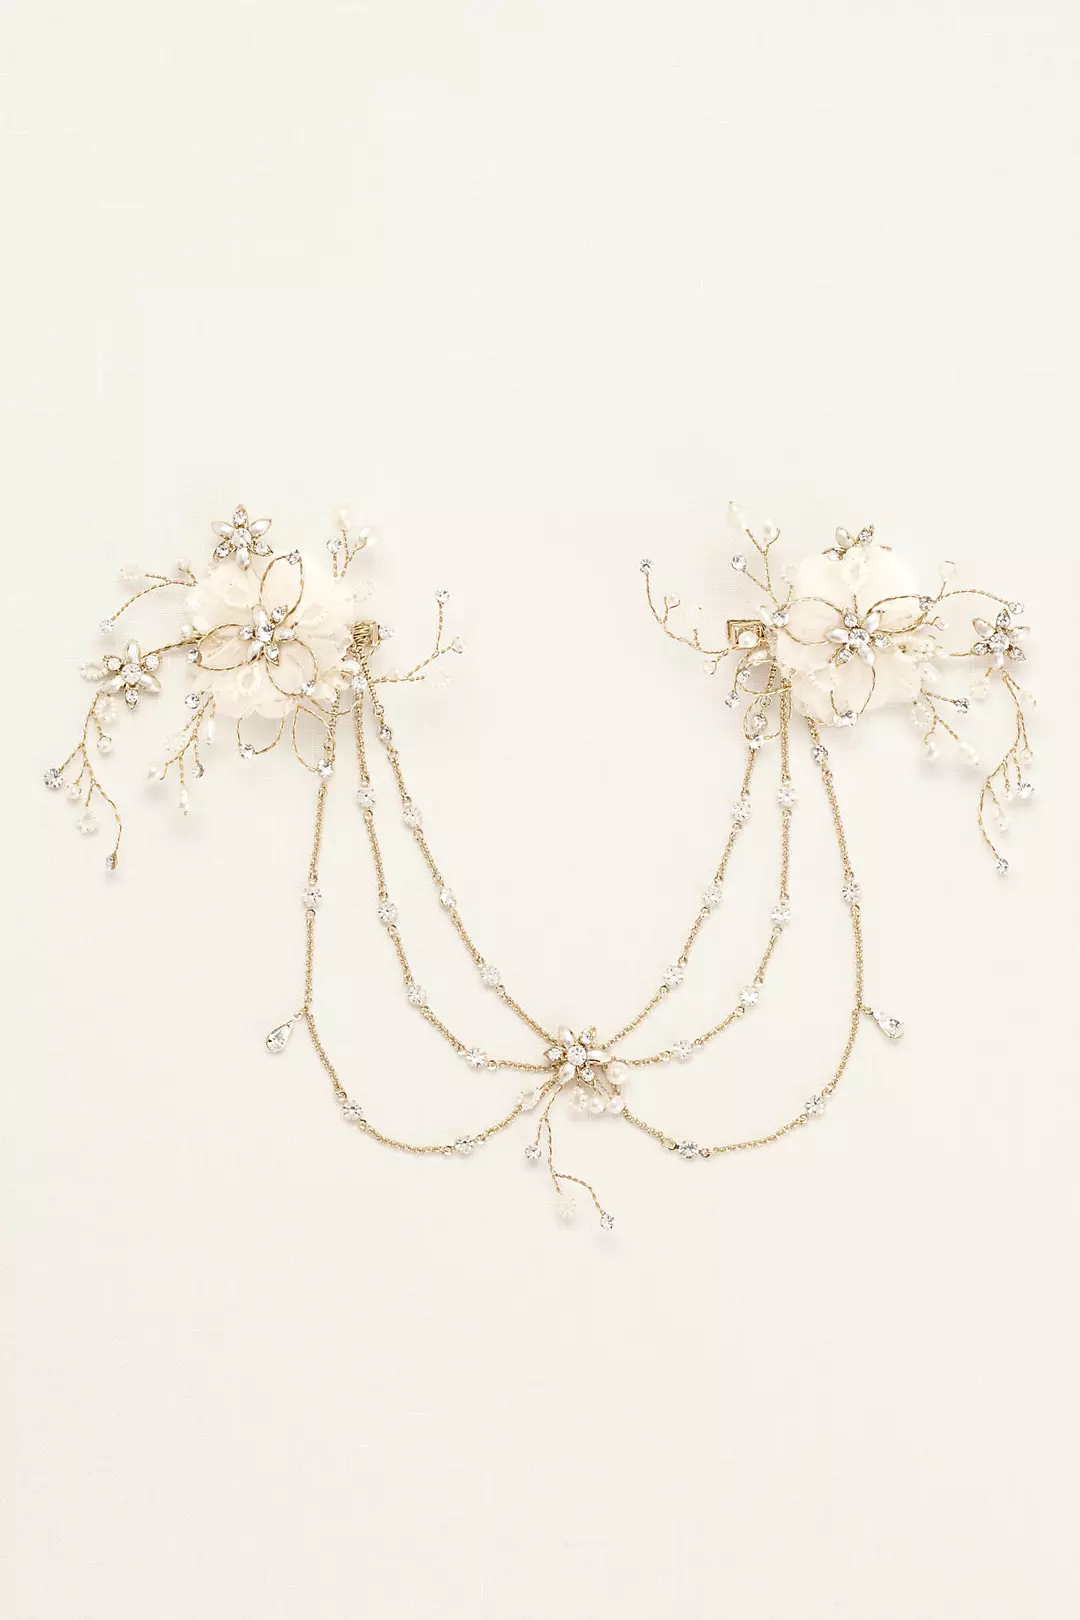 Double Flower Headpiece with Chain Swags Image 2